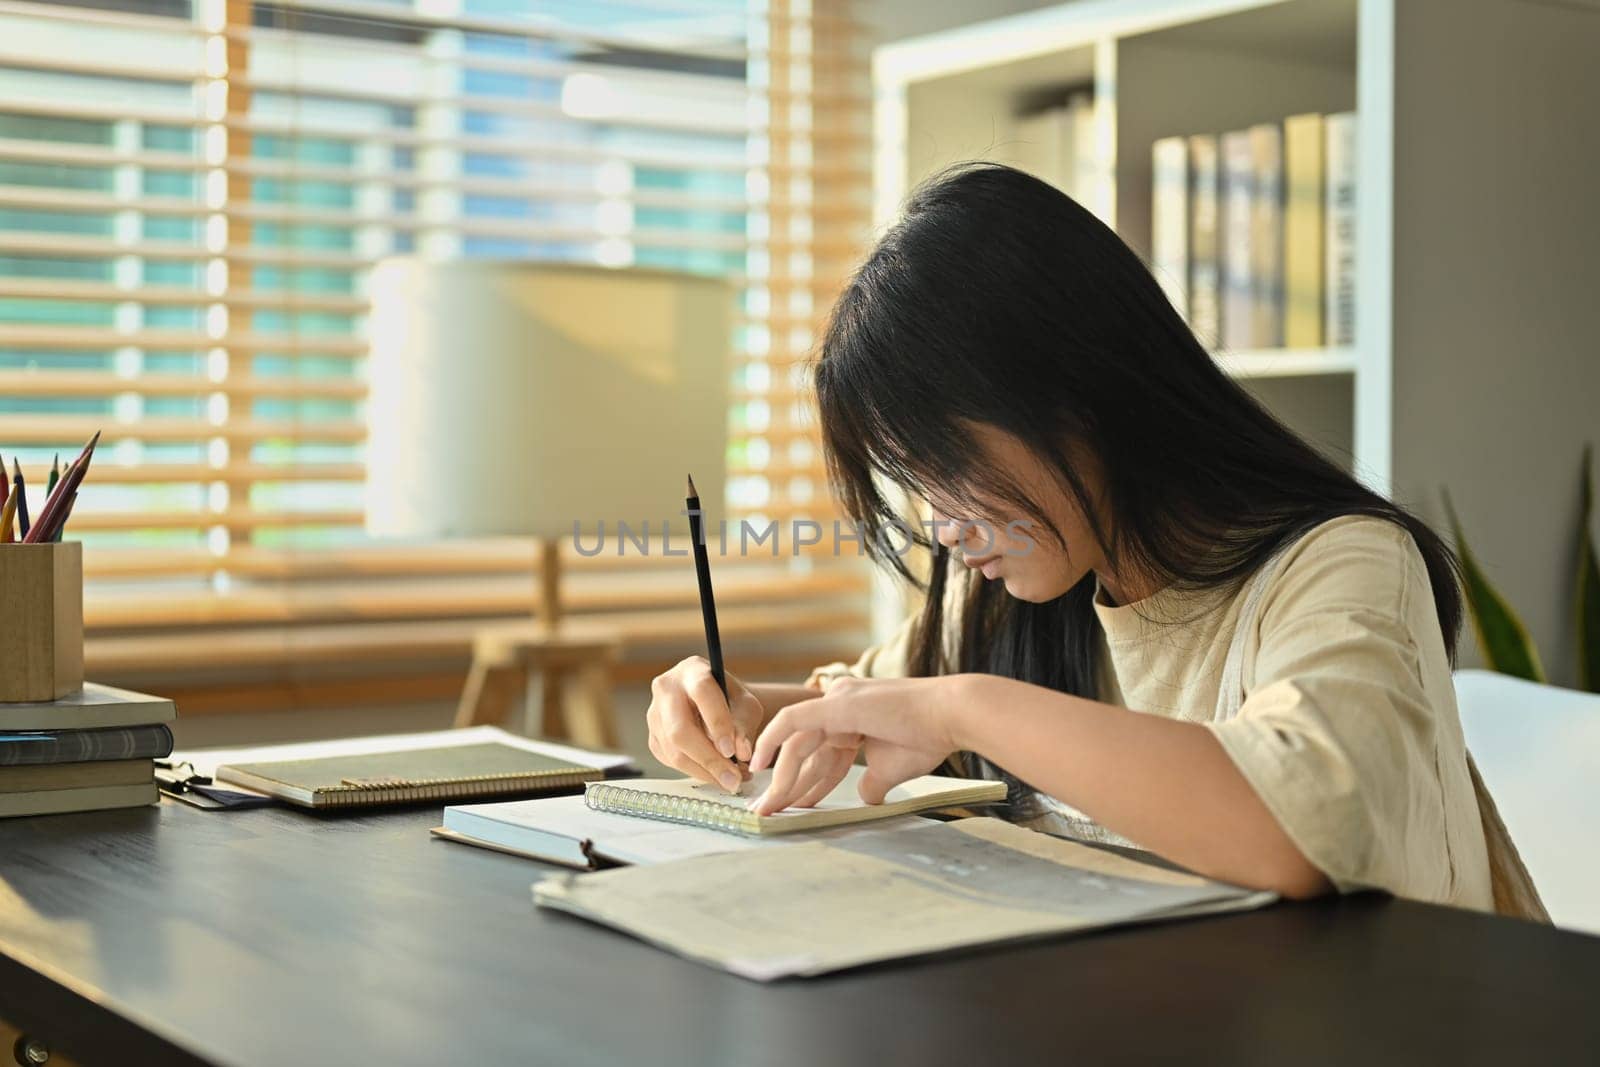 Focused teenaged girl doing homework, writing in notebook while sitting at table in living room.